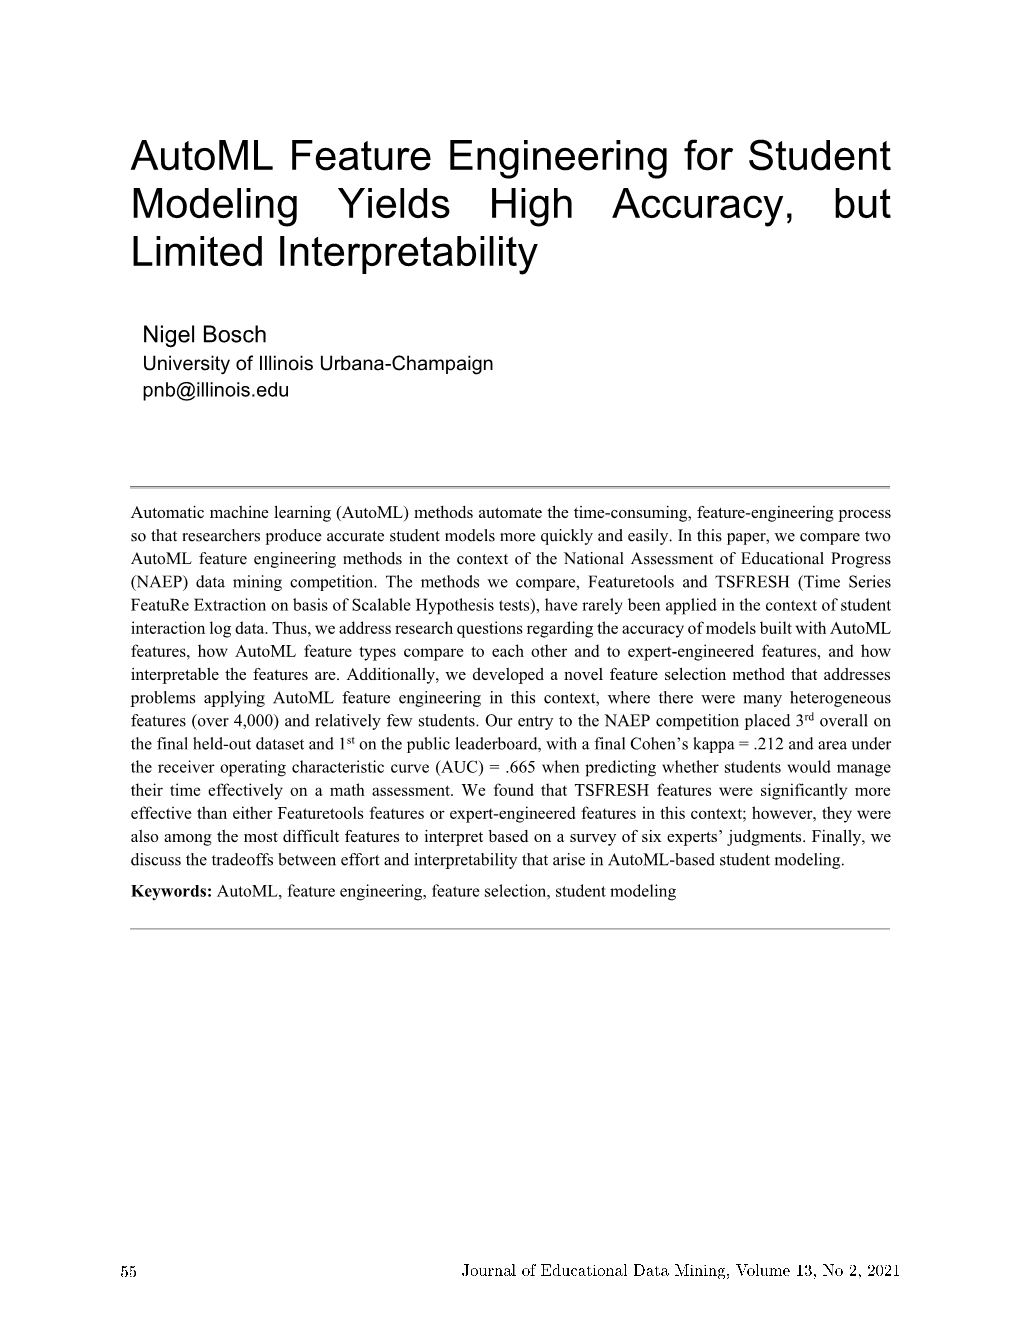 Automl Feature Engineering for Student Modeling Yields High Accuracy, but Limited Interpretability